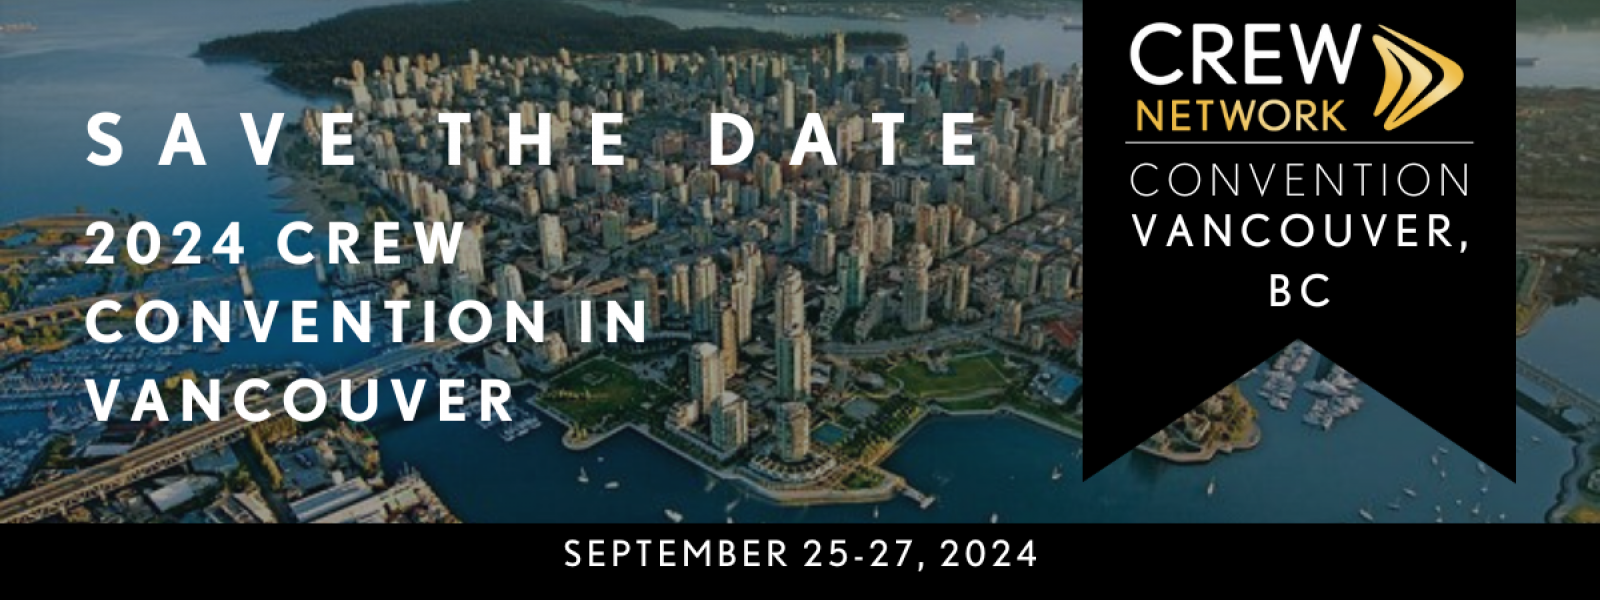 CREW Vancouver CREW Network Convention Save the Date 2023 10 06 LT 2